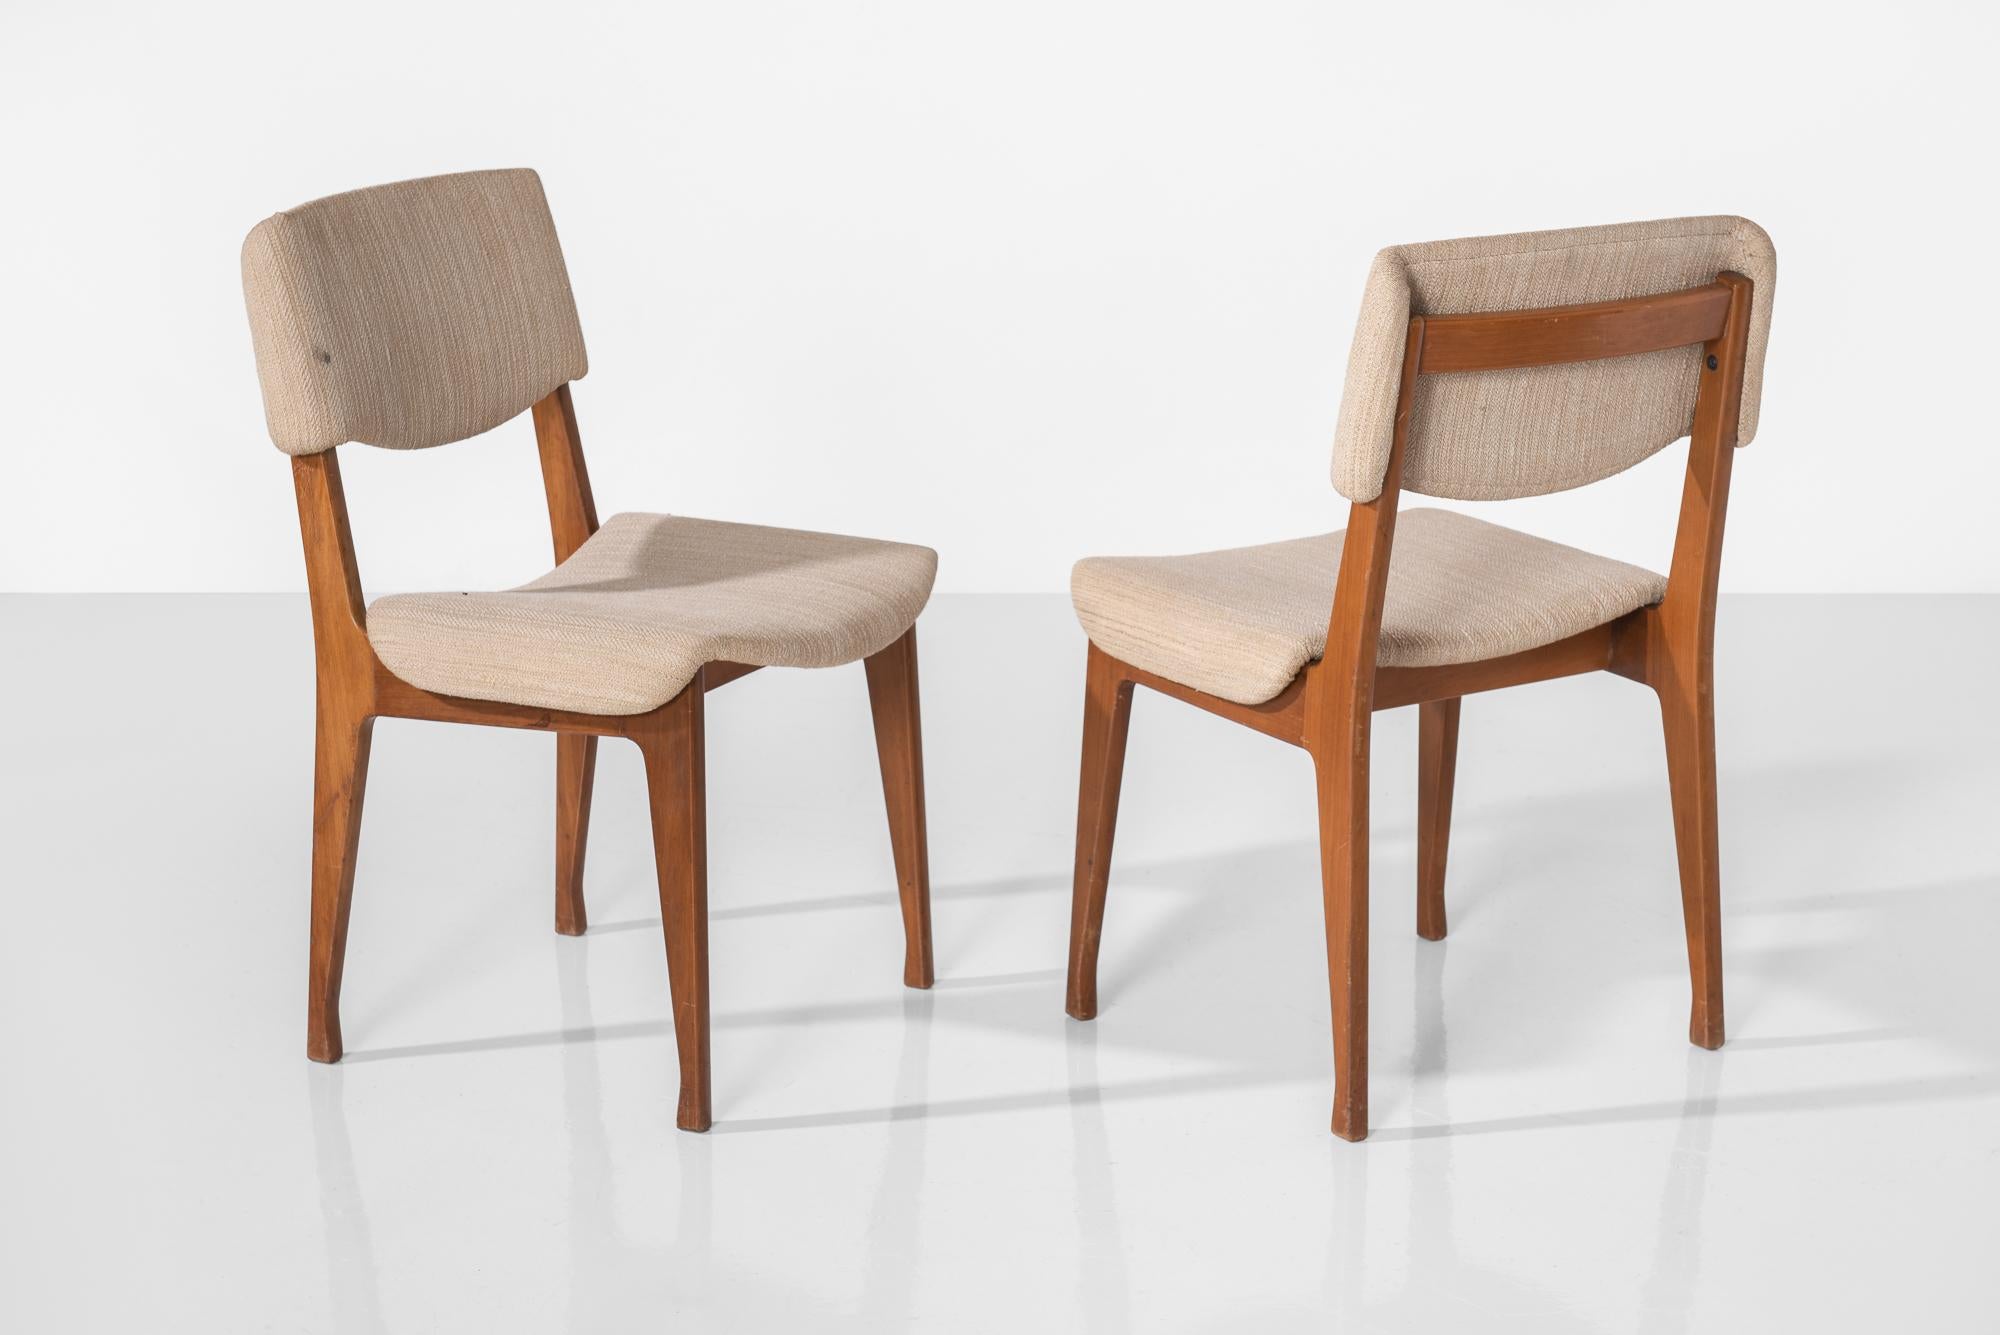 Italian Set of (4) Modern Dining Chairs by M.I.M., Italy, circa 1960